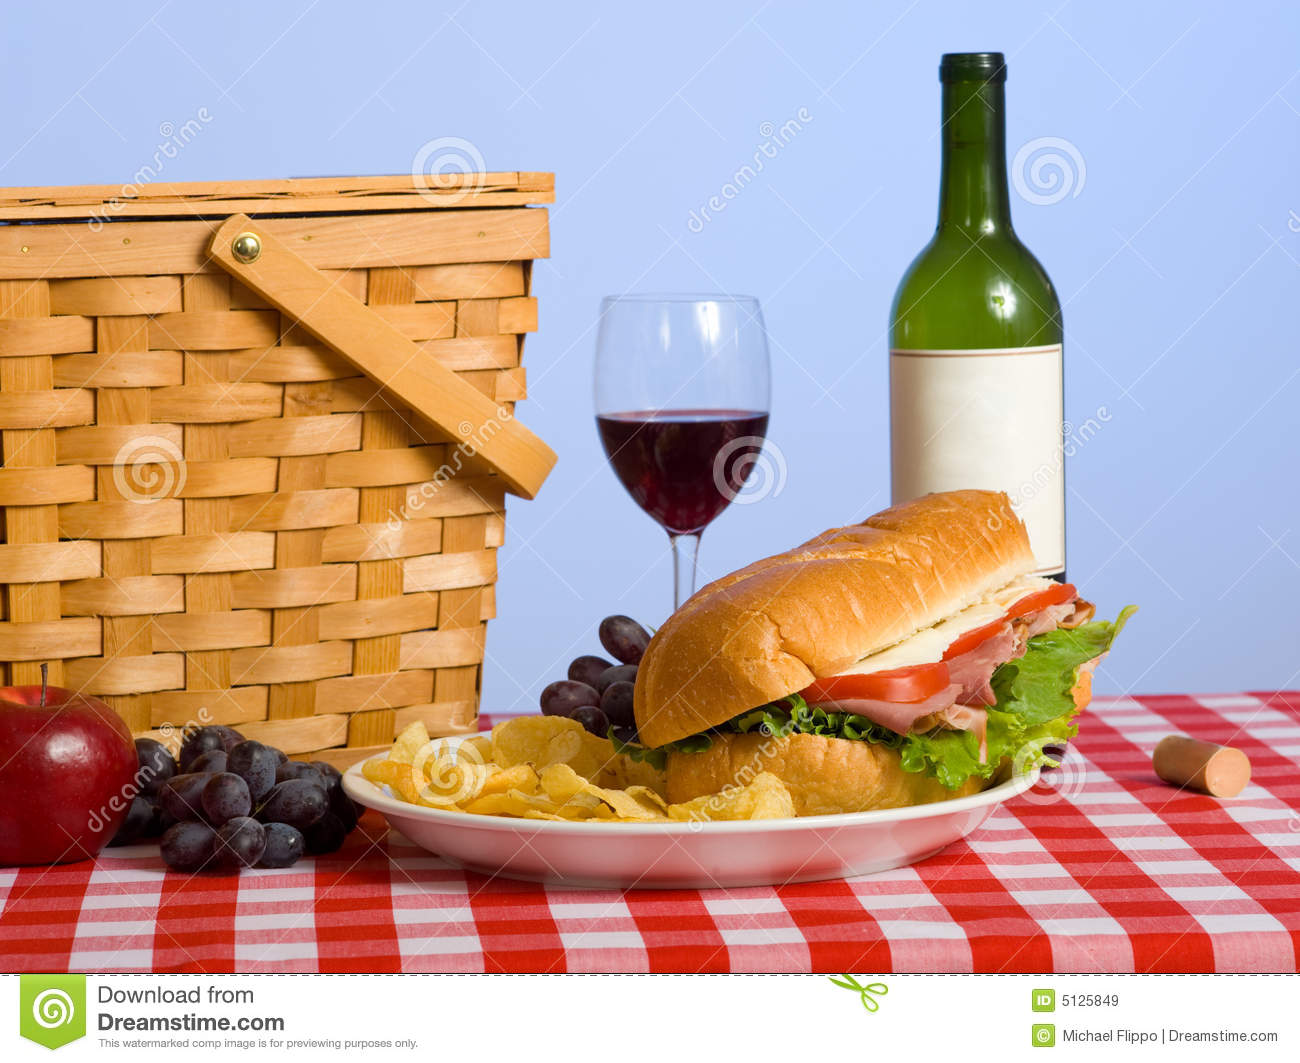 Picnic Lunch On A Red And White Gingham Tablecloth Including A